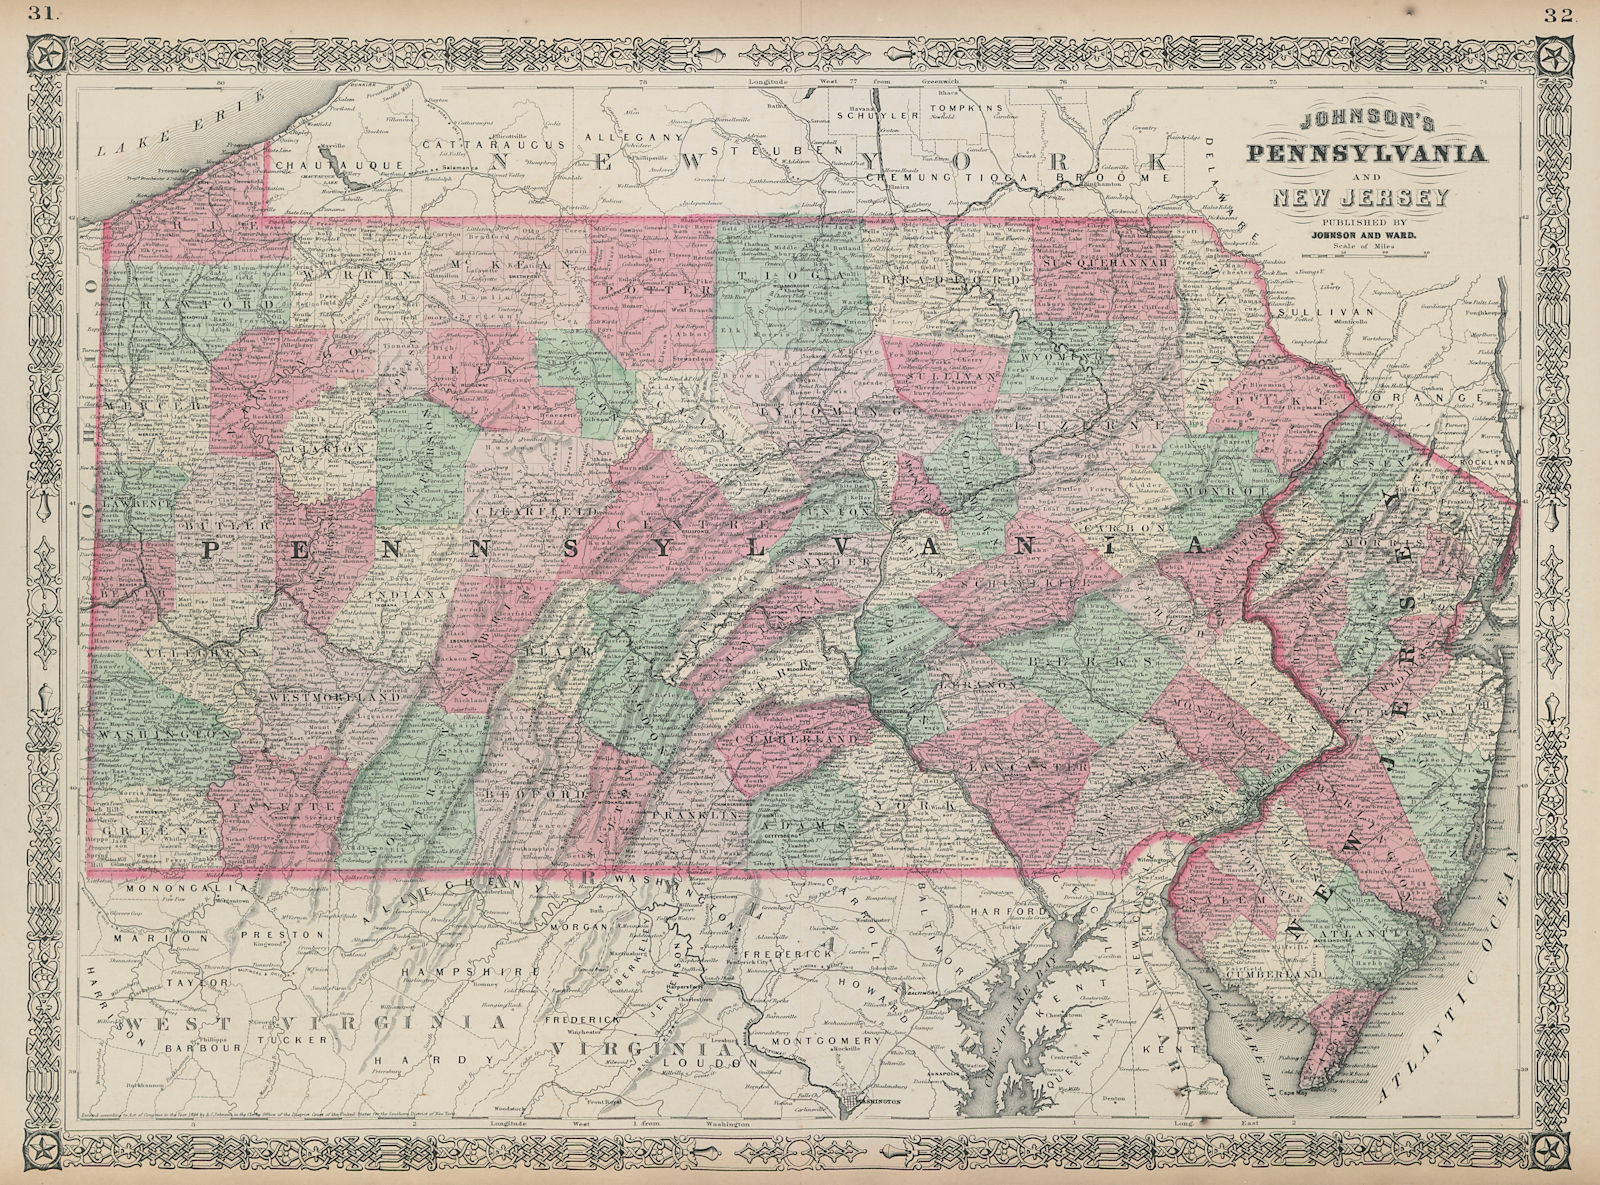 Johnson's Pennsylvania and New Jersey. US state map showing counties 1865